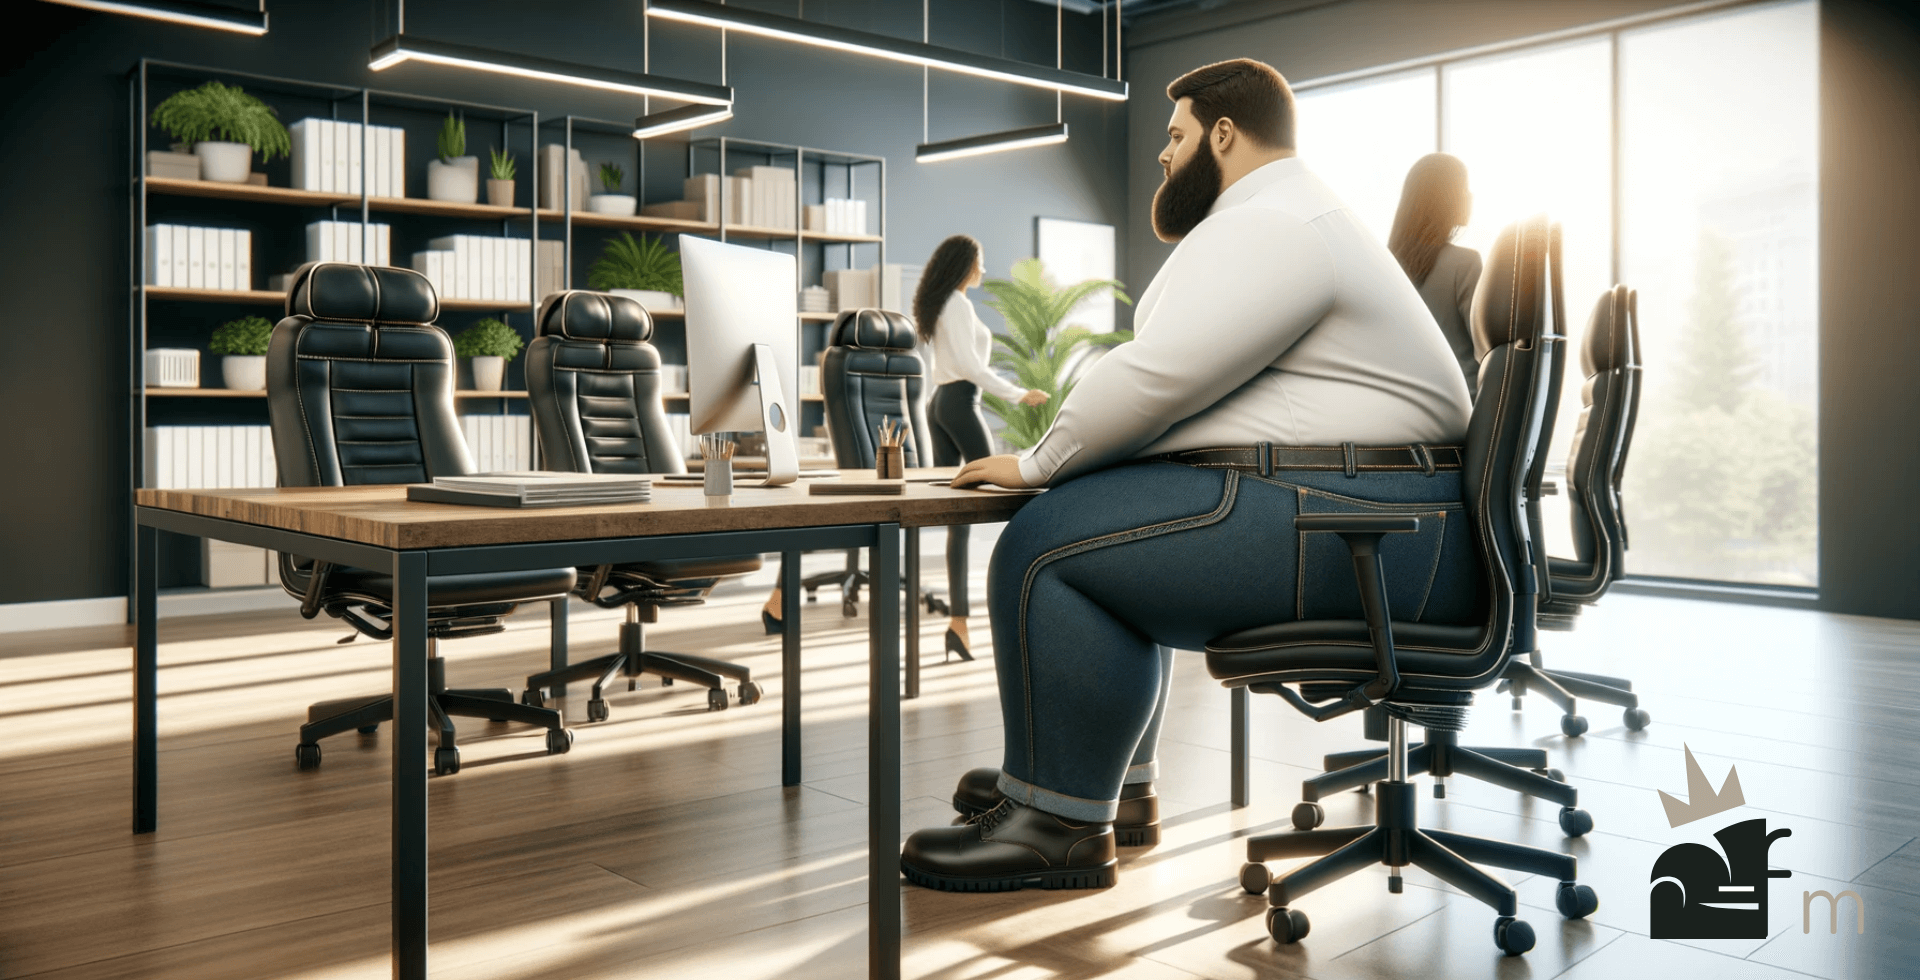 Best Office Chairs for Chubby People